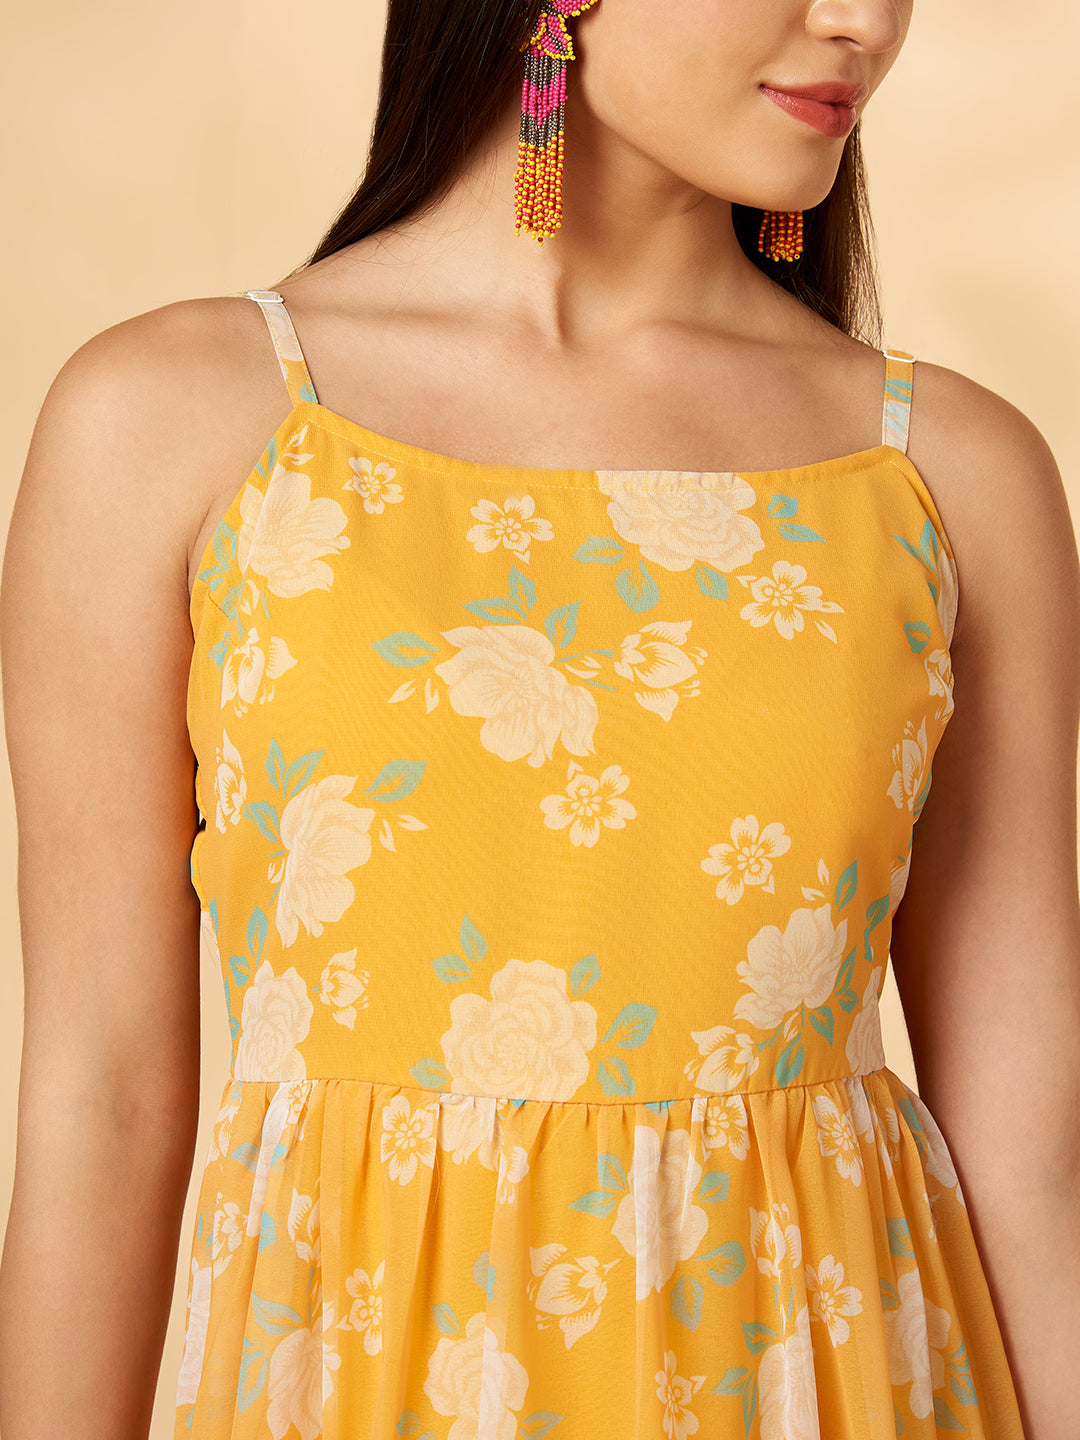 Floral Yellow Printed Tiered Dress